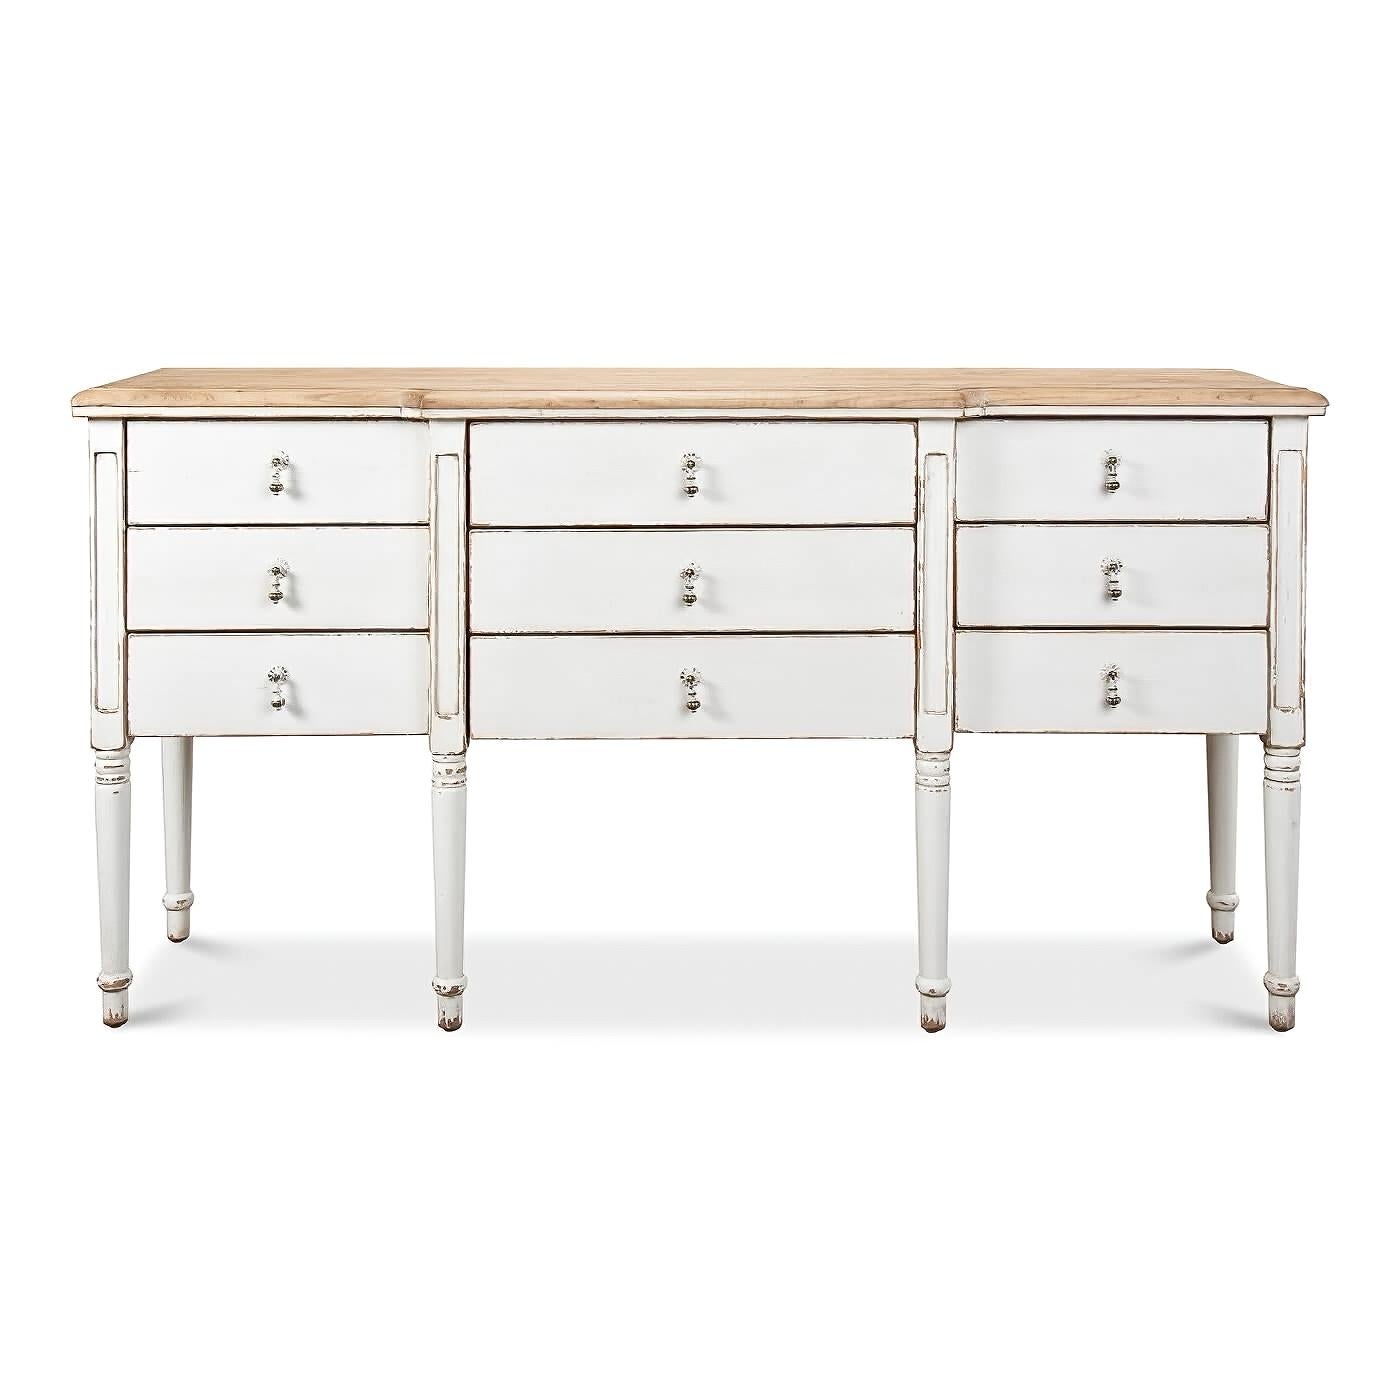 A French Country painted sideboard with a whitewash finish and a natural pine top. Inspired by a French country antique, this sideboard has nine individual drawers with decorative drop pulls. The lower cabinet has a distressed whitewash finish, the